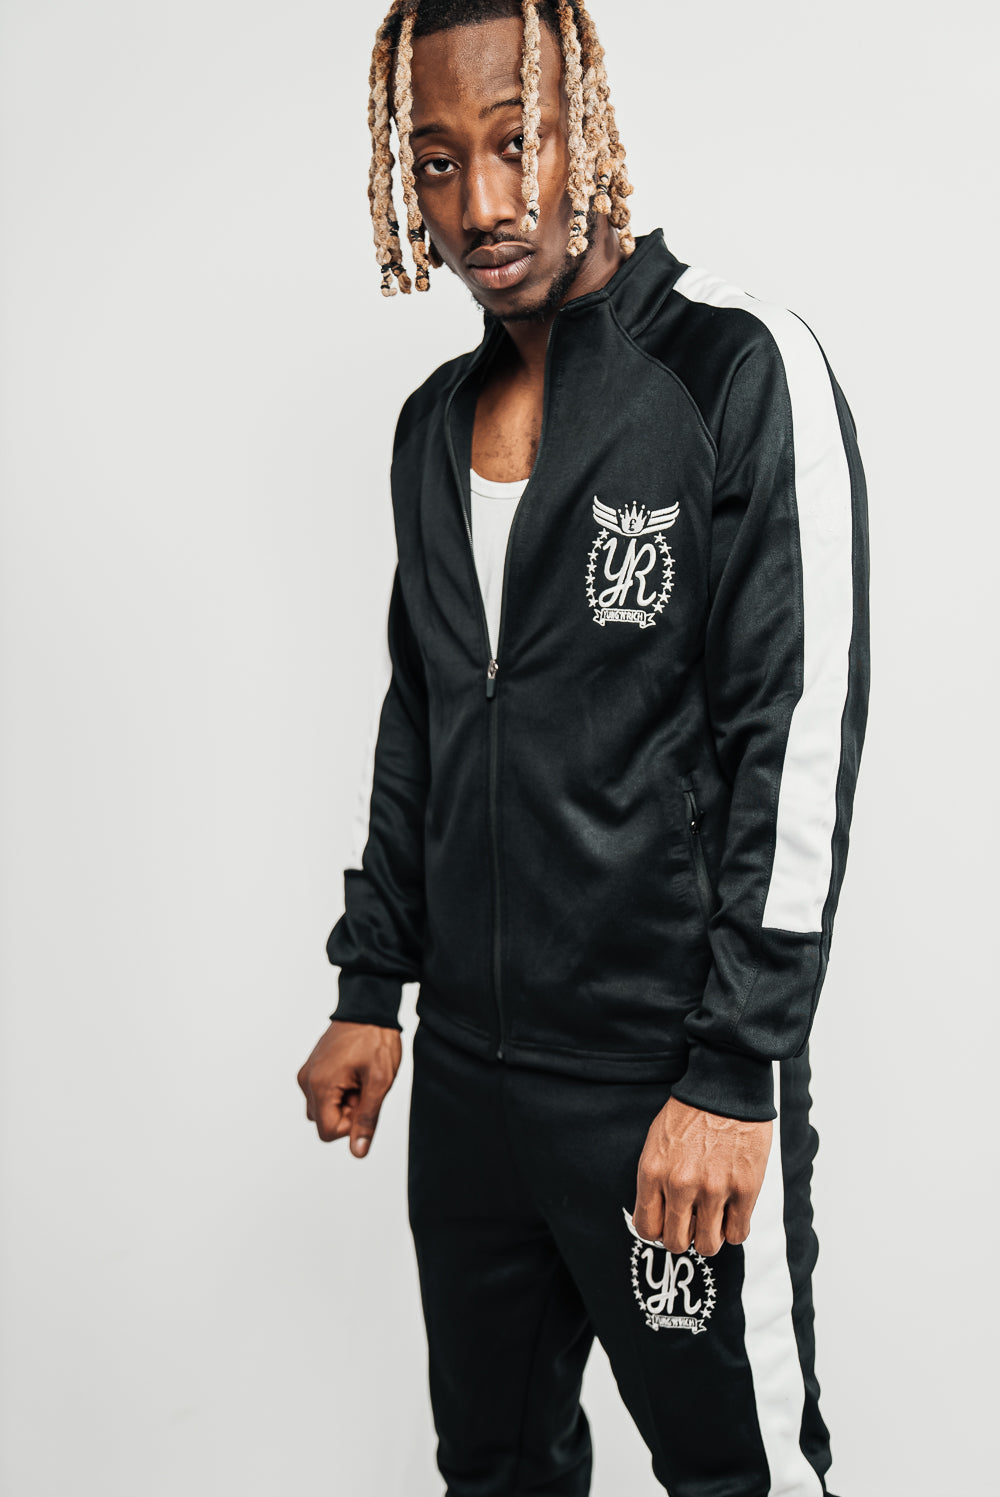 "YUNG'N'RICH Men's Funnel Neck Contrast Panel Stripe Tracksuit in black and white, featuring a unique funnel neck design, bold contrast panel stripes and embroidered Yung'n'Rich branding. Perfect for everyday wear and travel, available in unisex Regular size type"